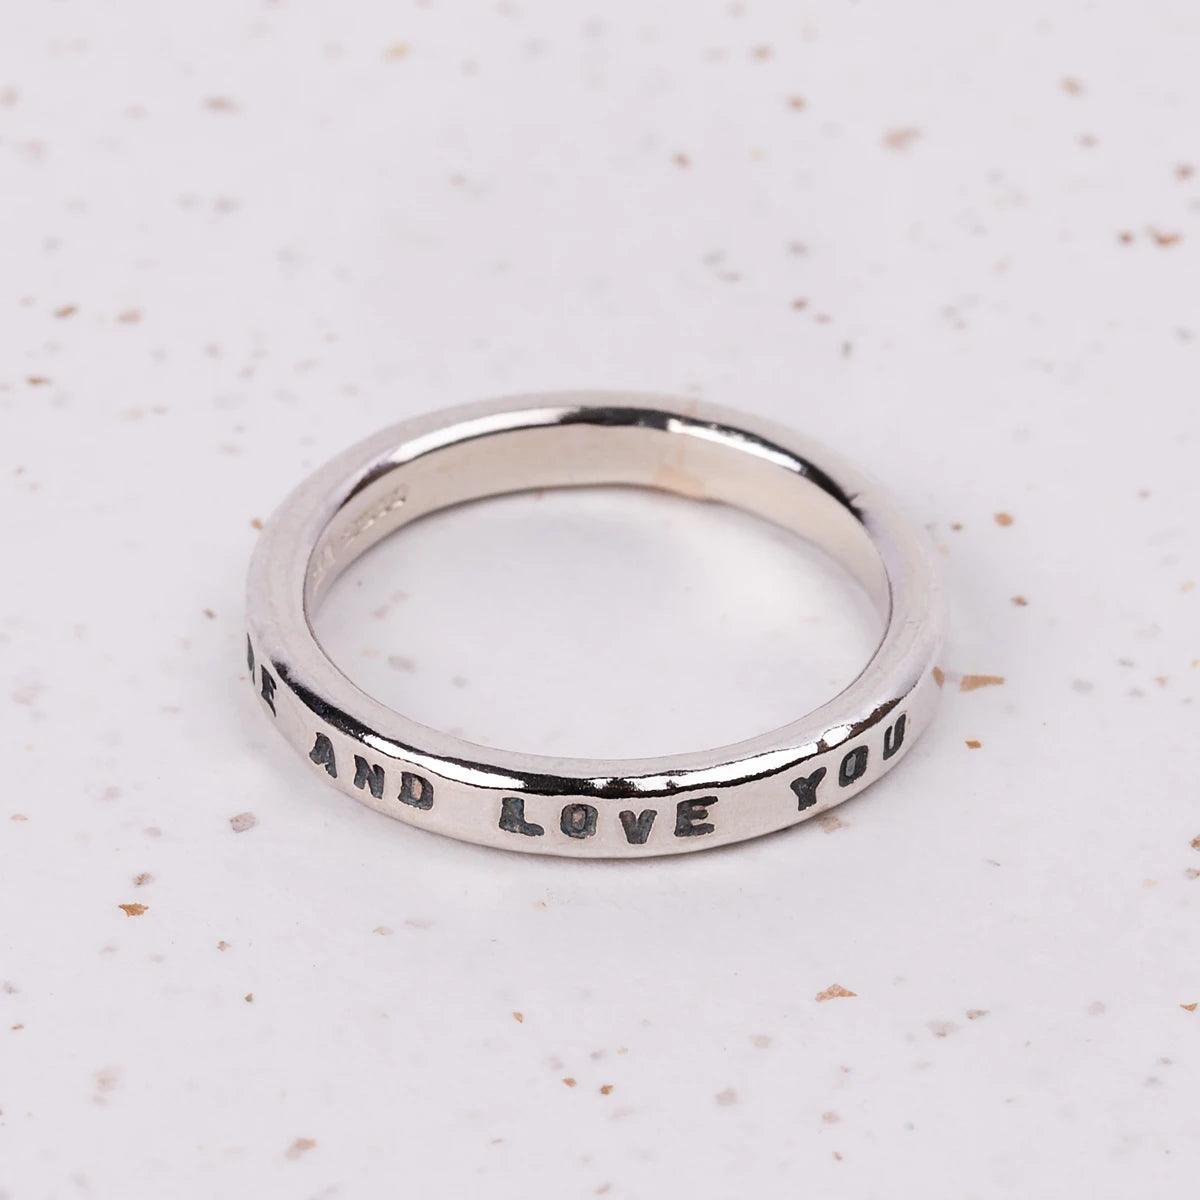 Jane Austen "I admire and love you" Quote Ring - JaneAusten.co.uk